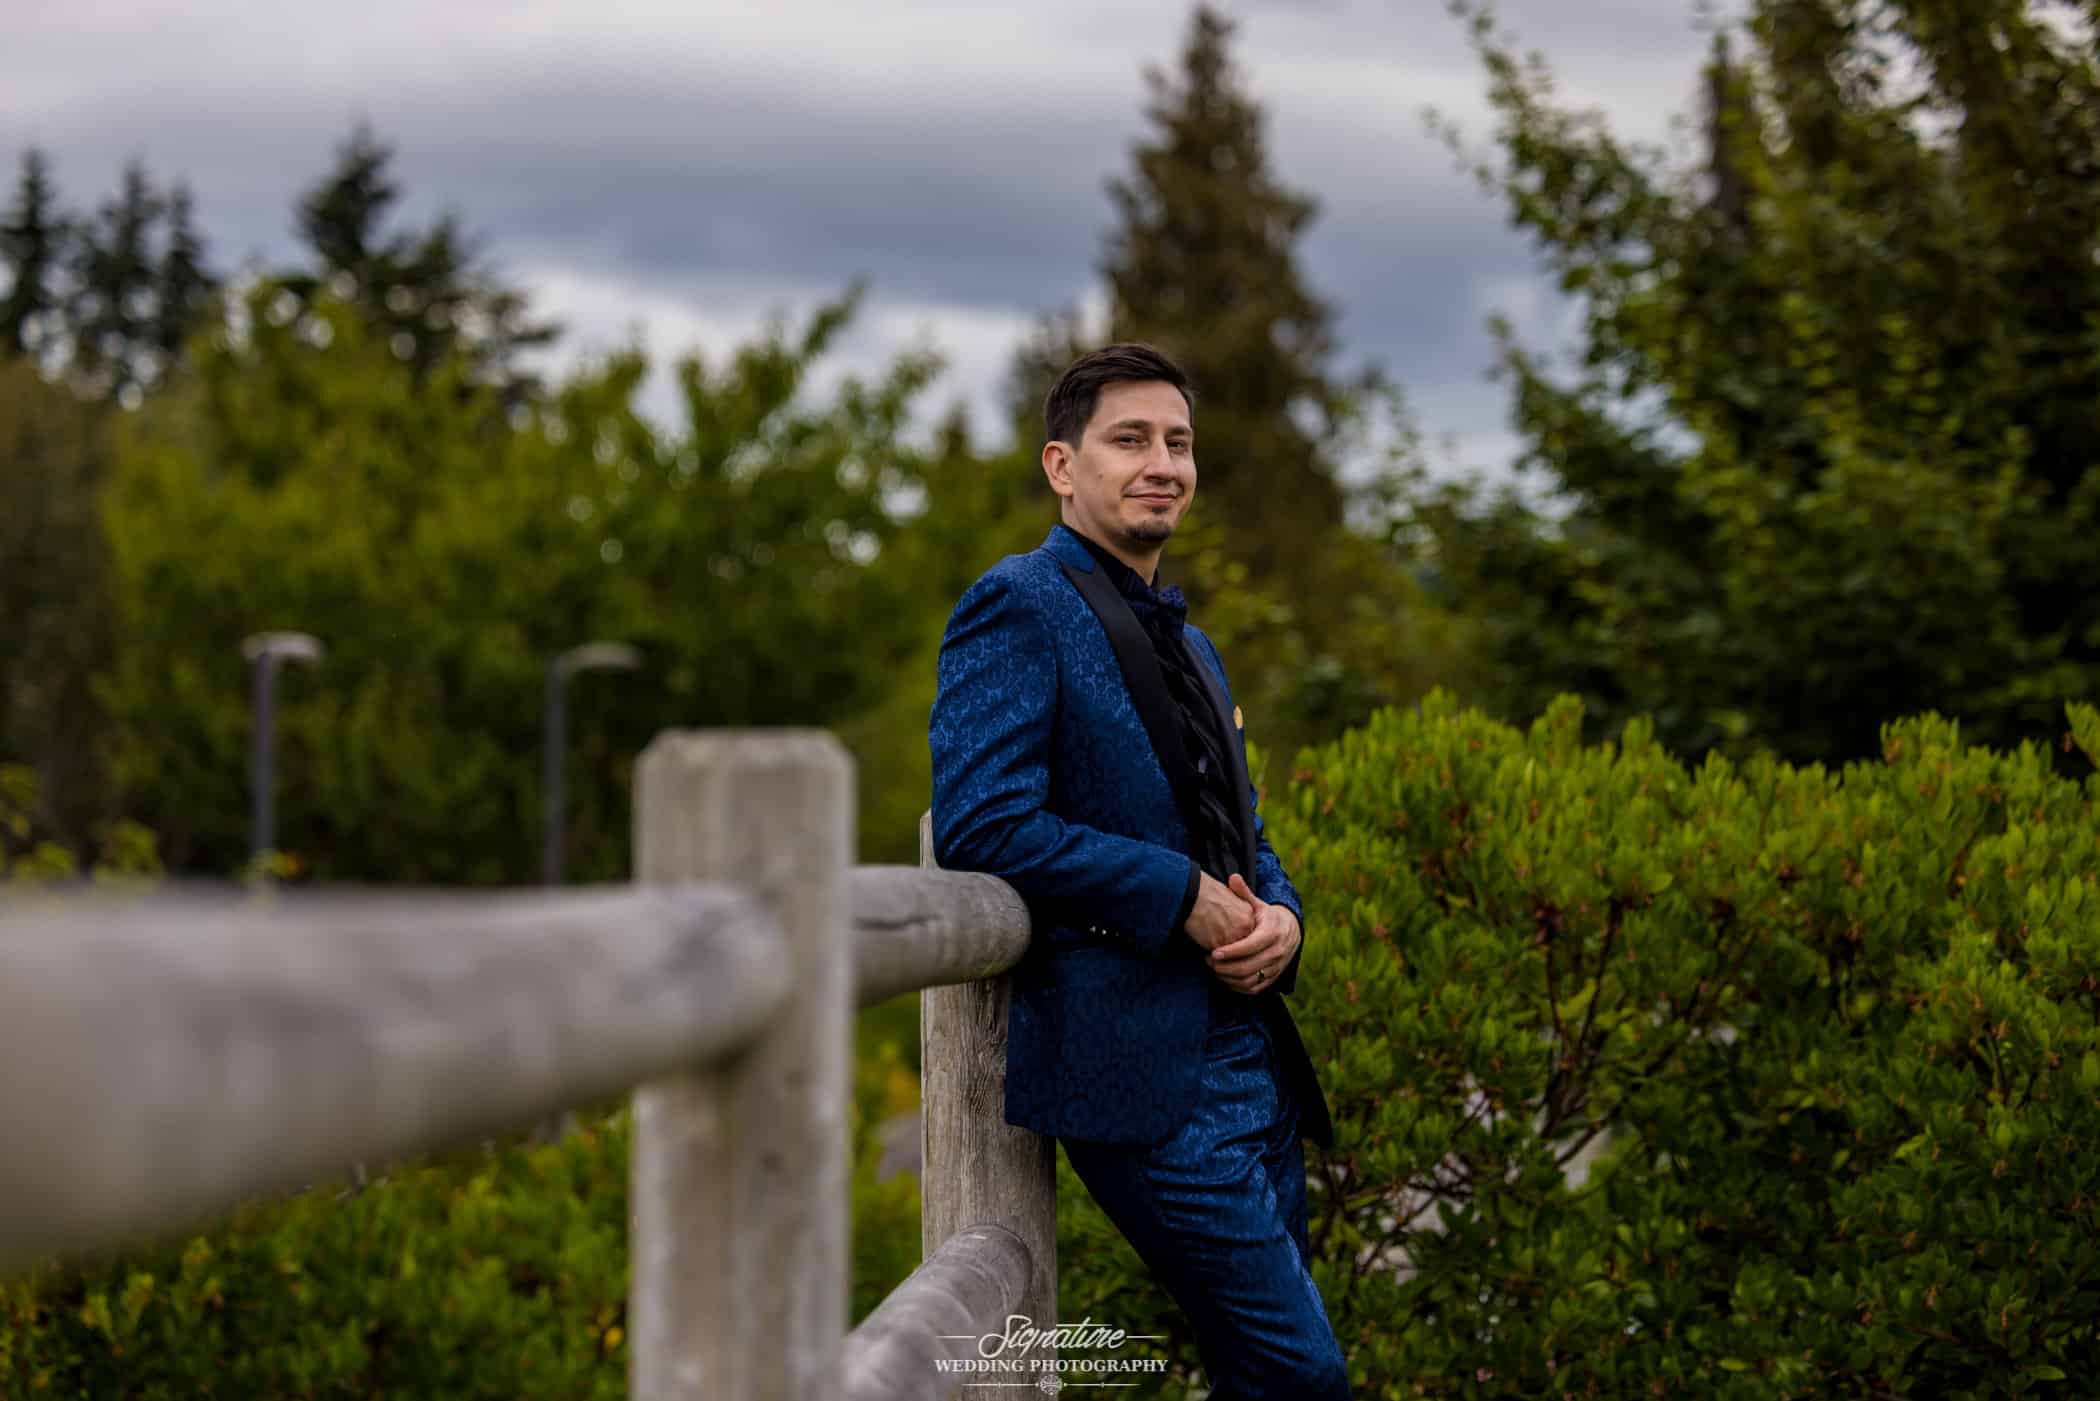 Groom leaning against wood fence